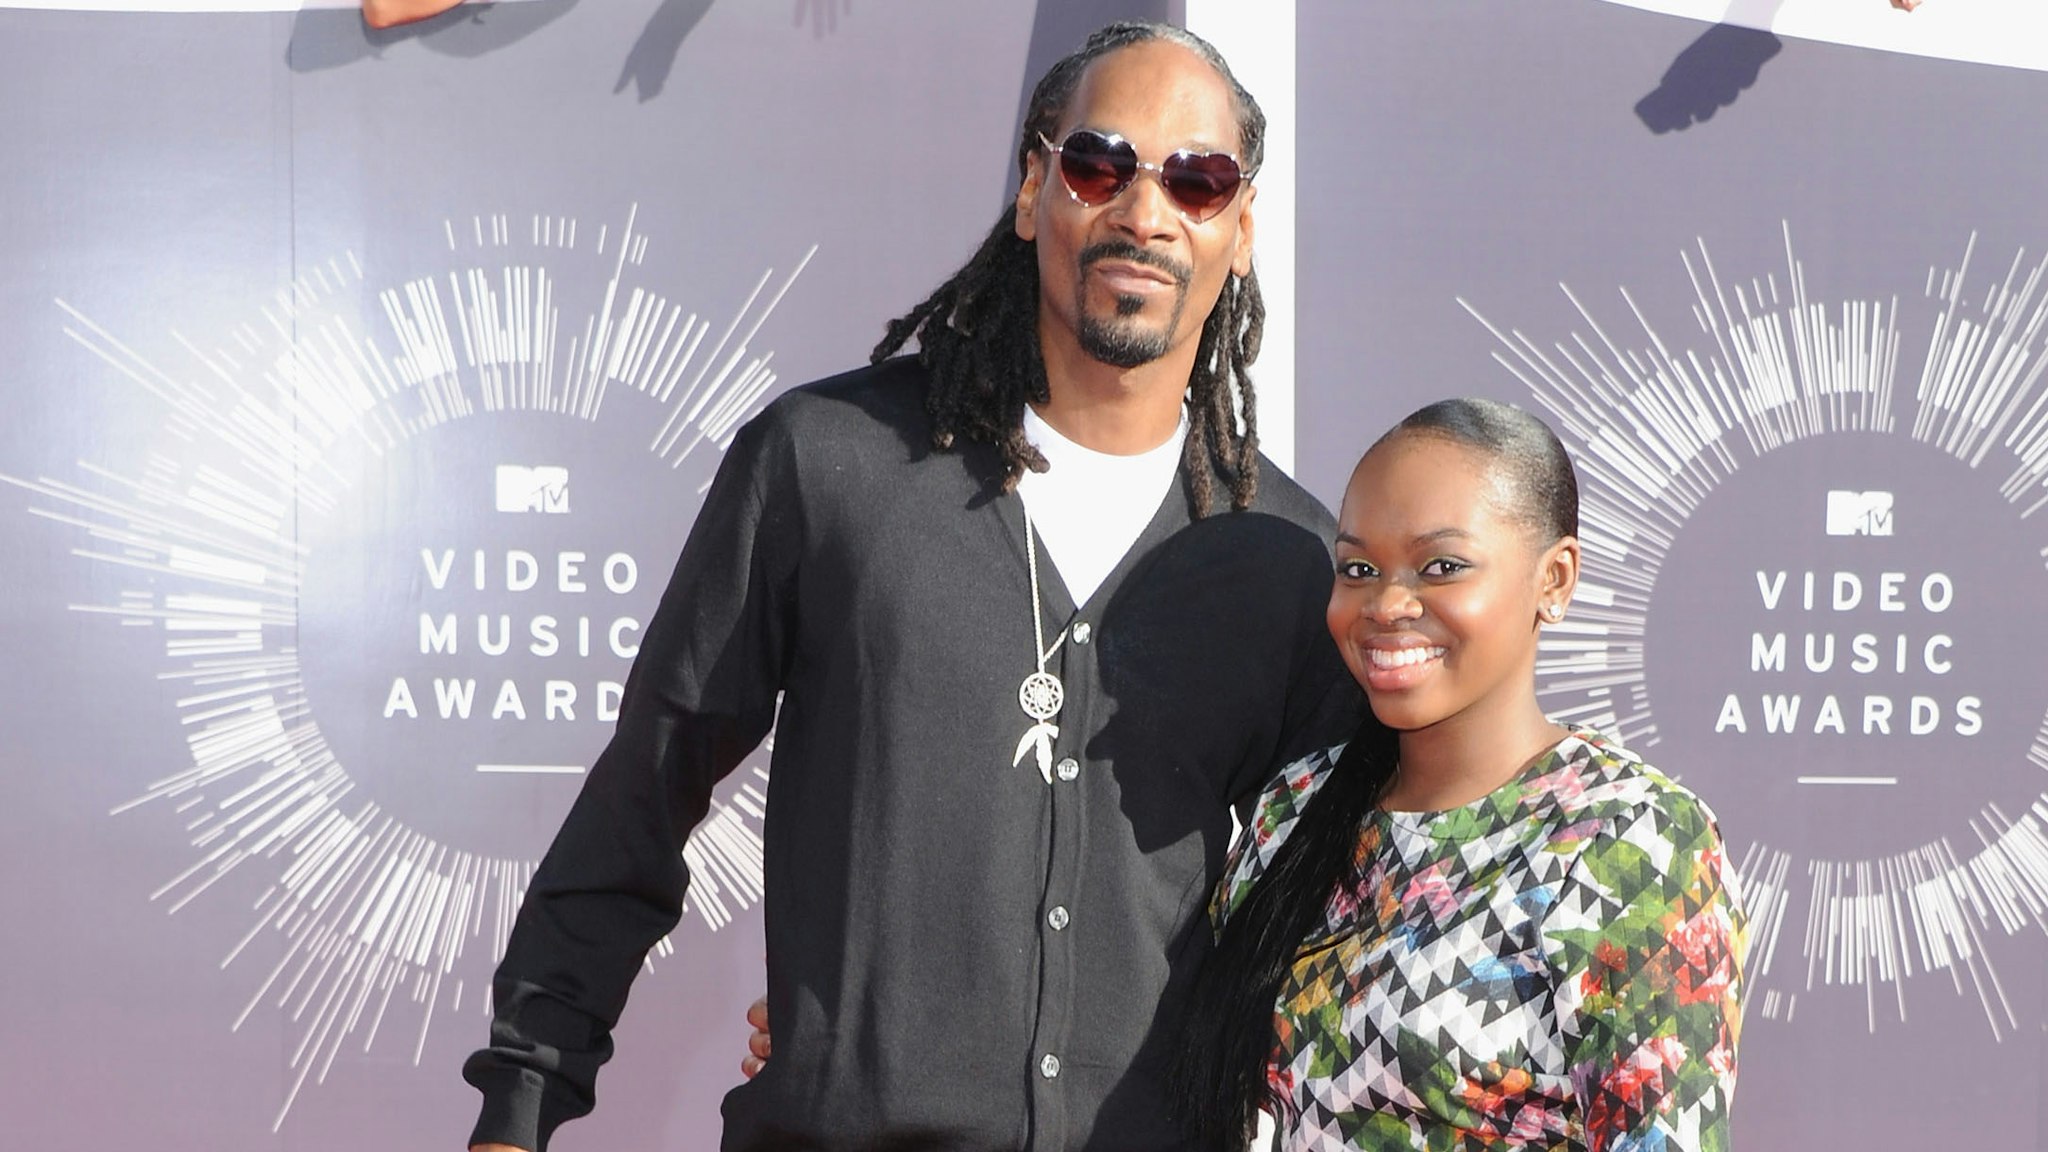 INGLEWOOD, CA - AUGUST 24: Rapper Snoop Dogg and Cori Broadus arrive at the 2014 MTV Video Music Awards at The Forum on August 24, 2014 in Inglewood, California.